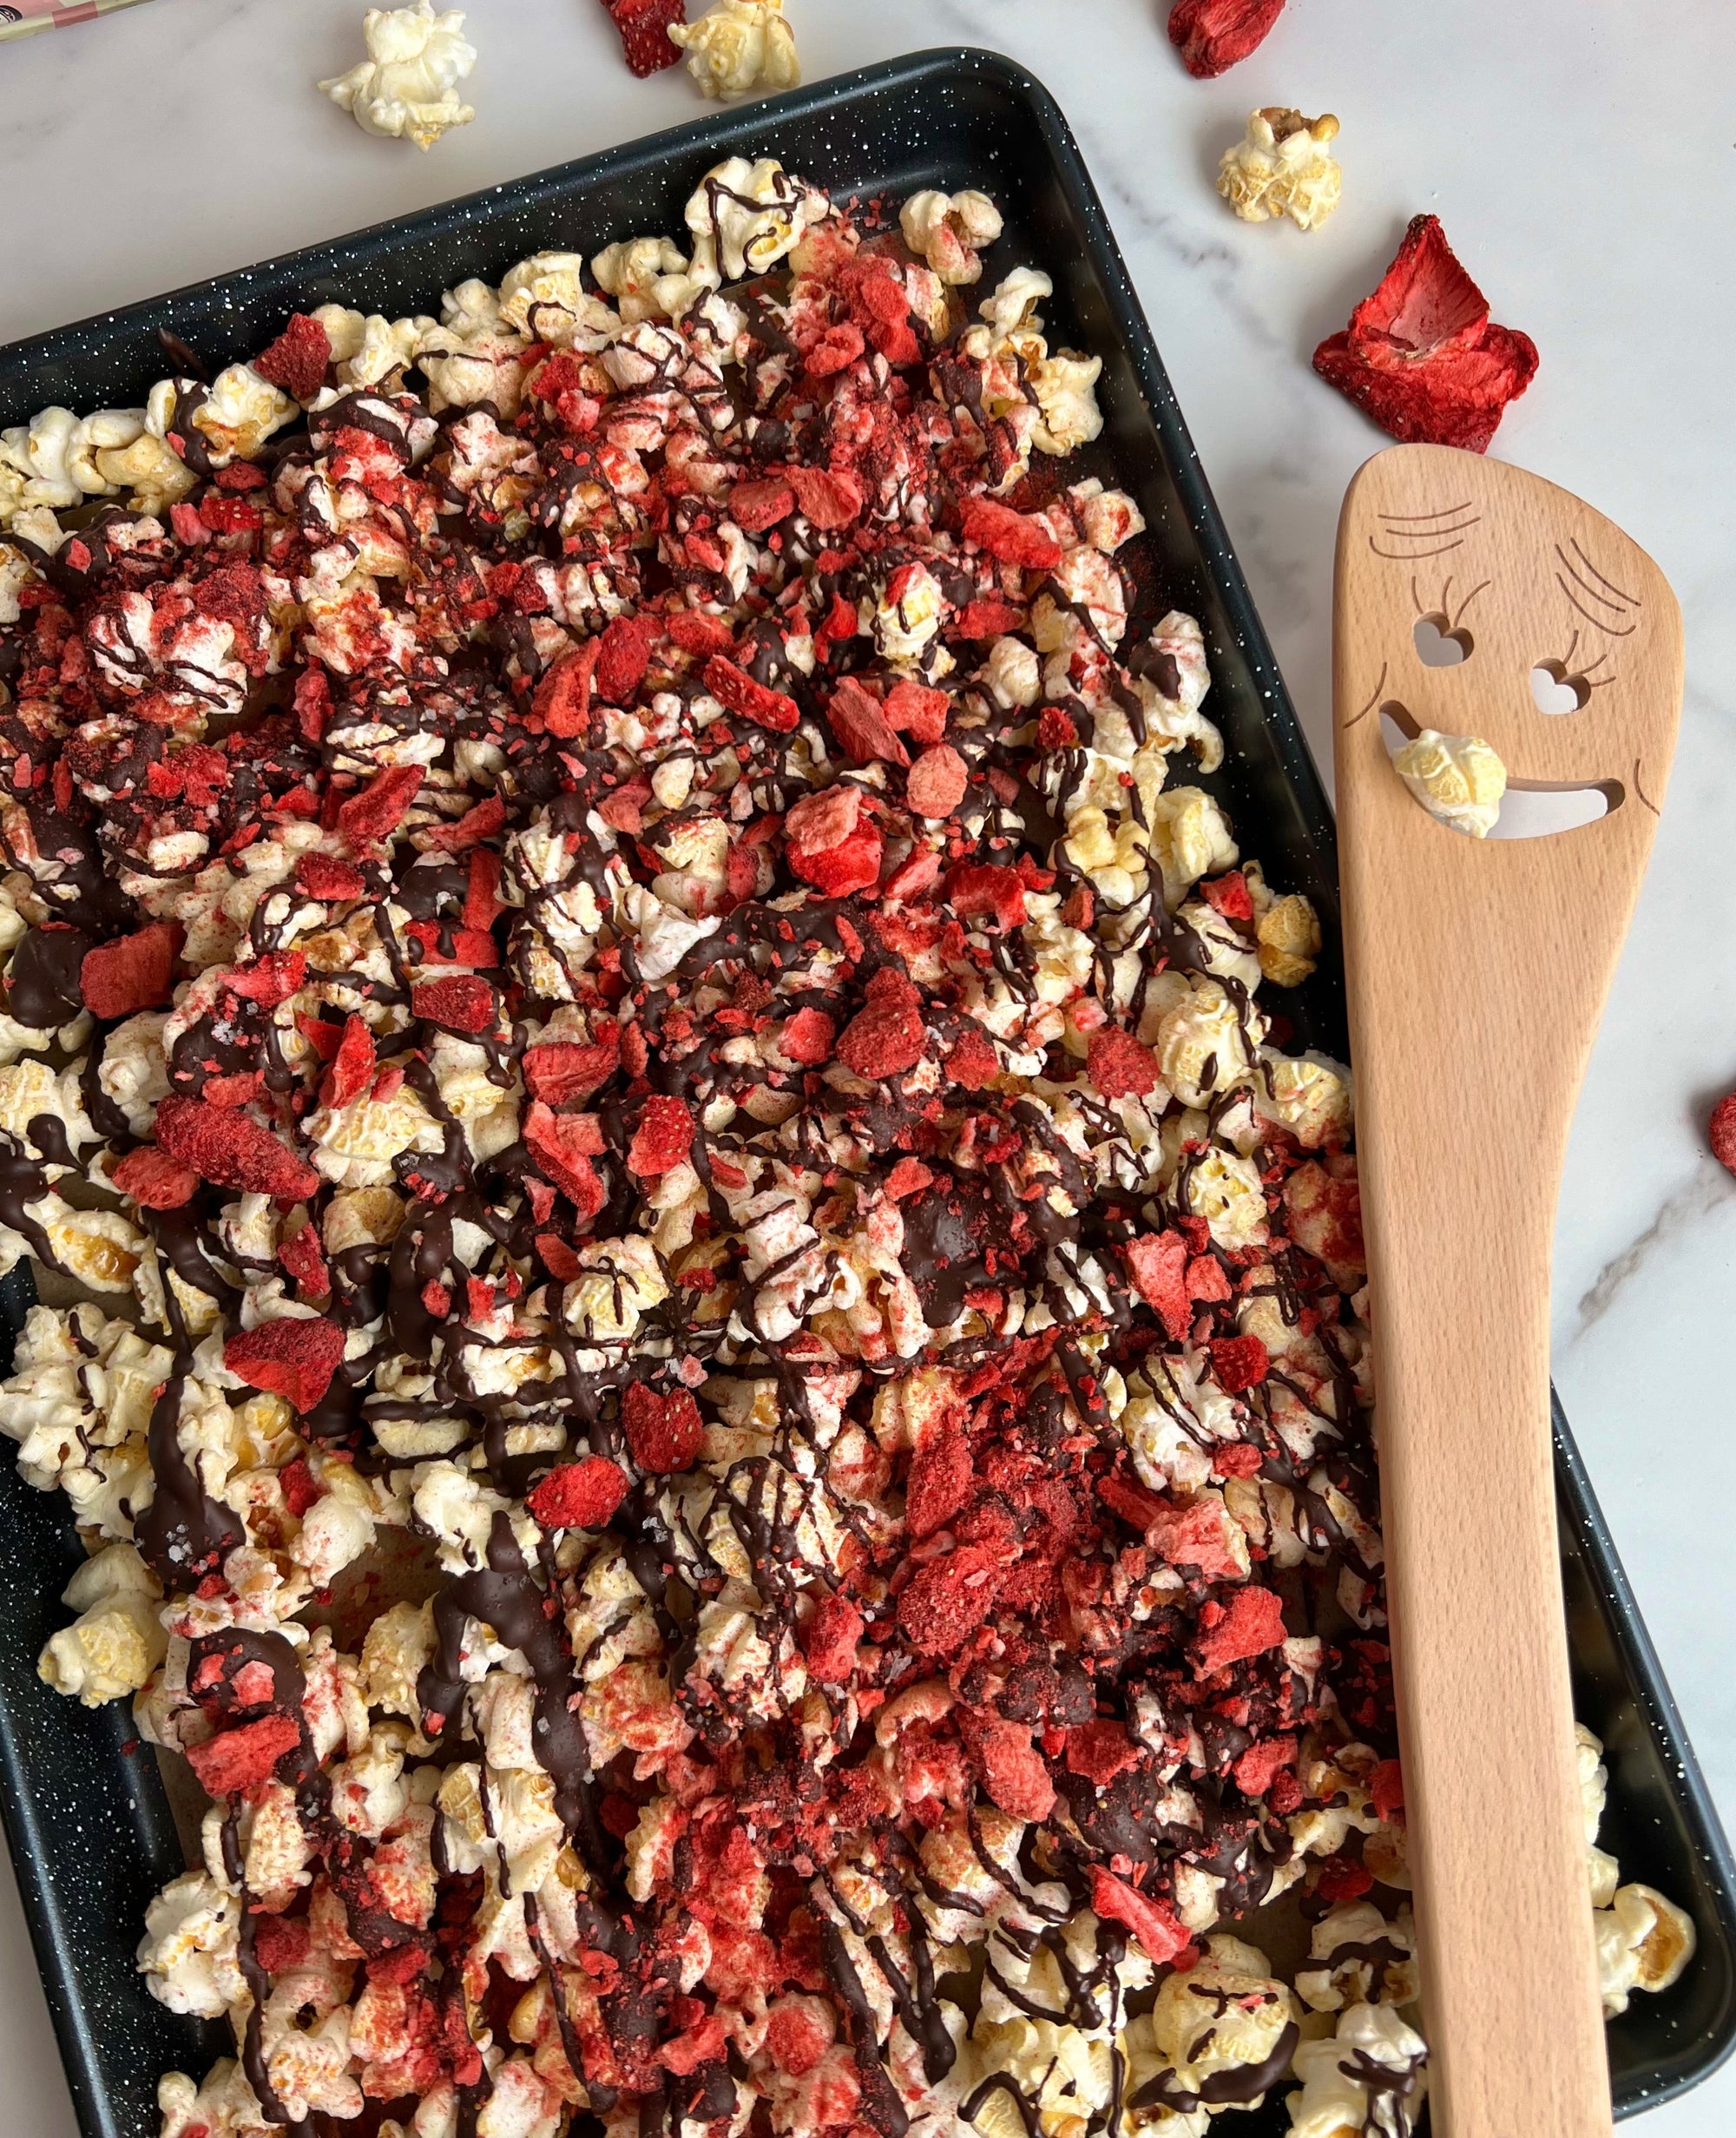 DIY Chocolate Drizzled Strawberry Kettle Corn